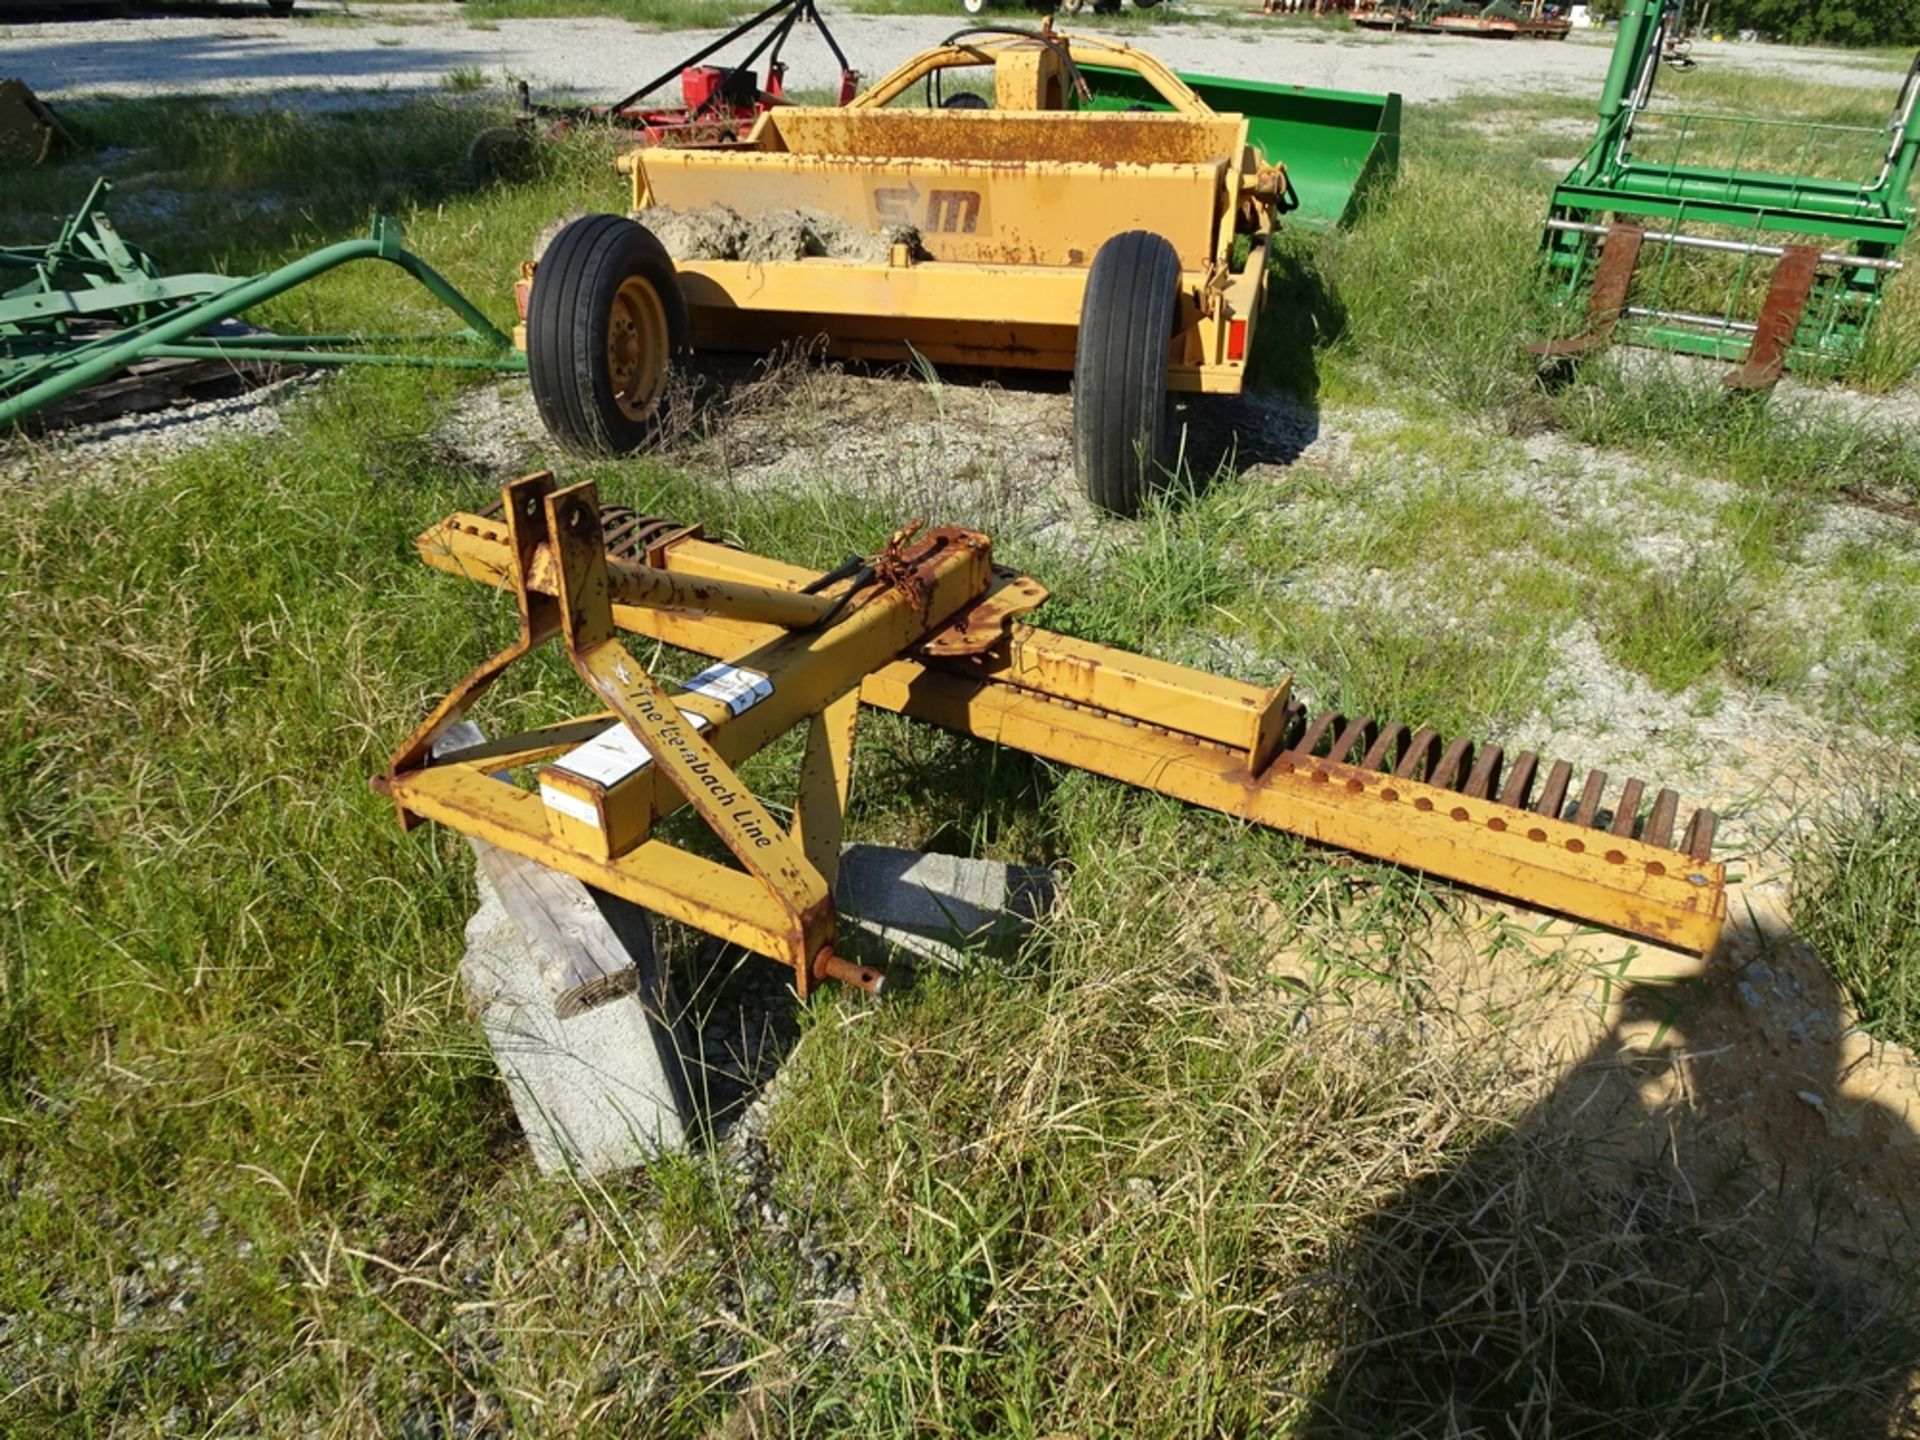 leinbach Machinery Corp "the Leinbach Line" 7' York Rake with class 1 3 point hitch